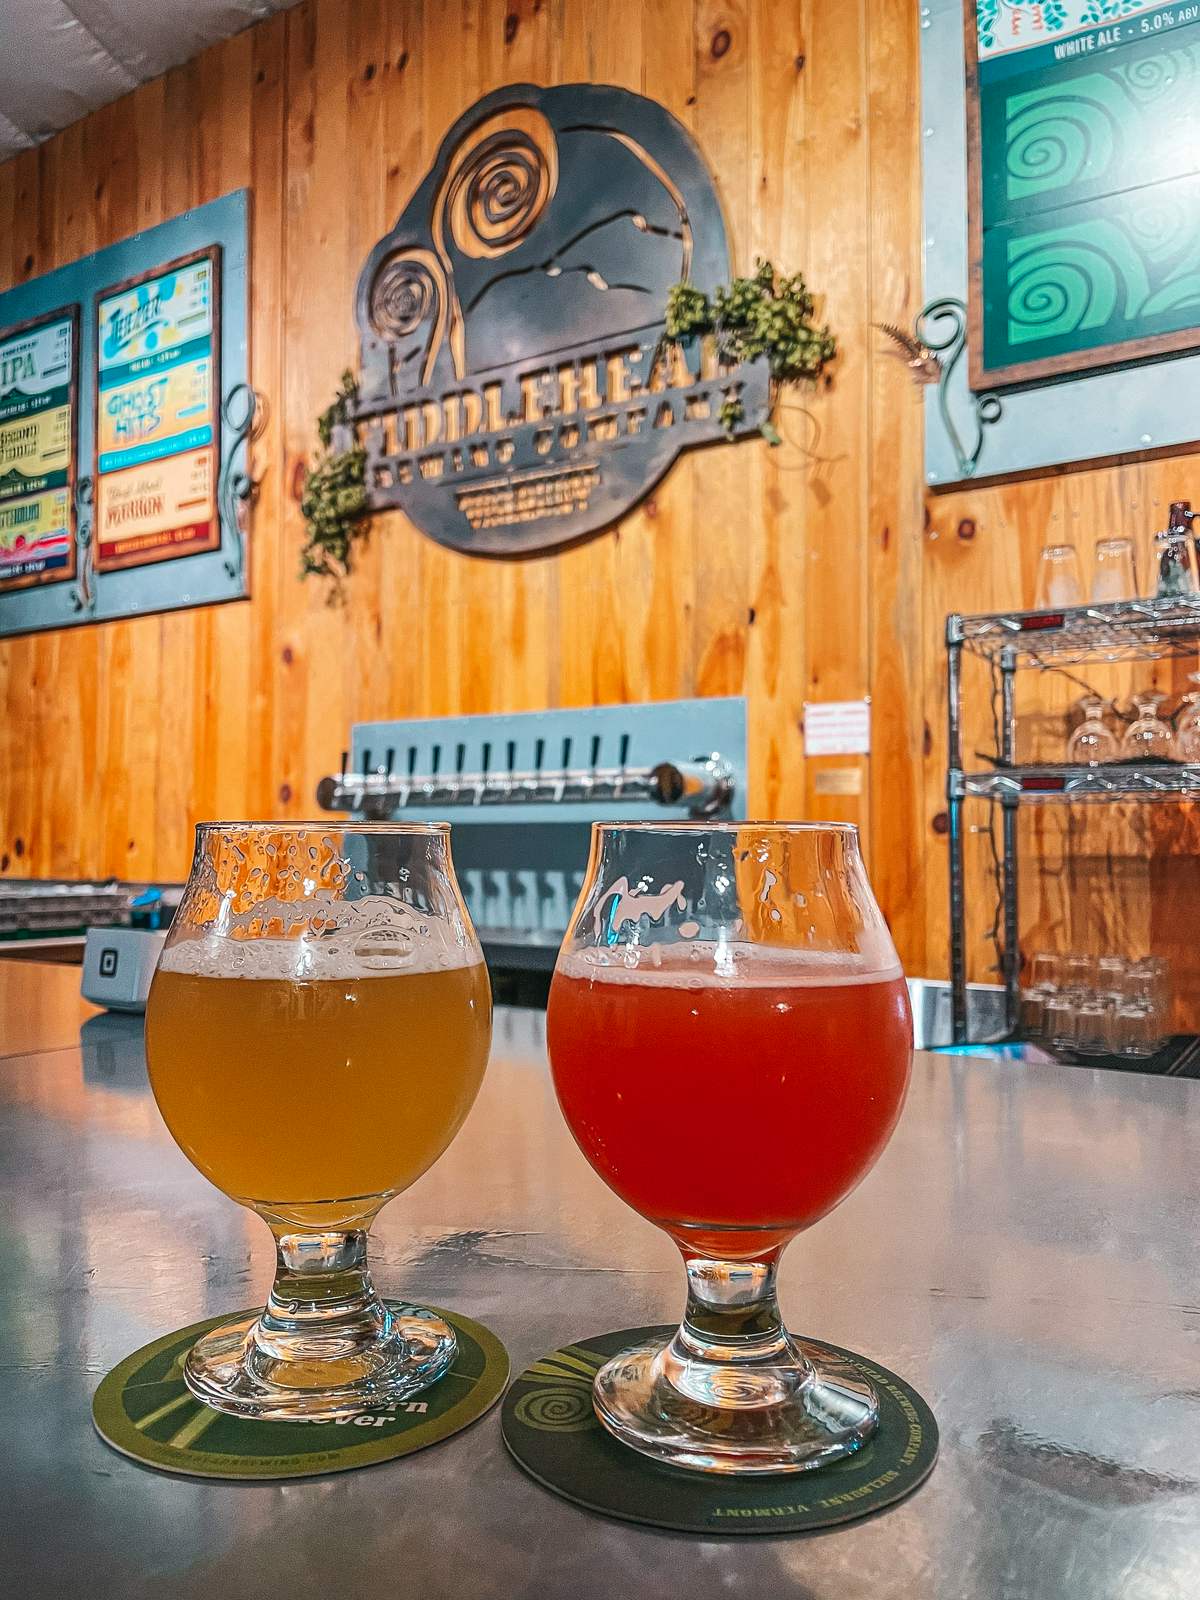 Fiddlehead Brewing Company in Vermont